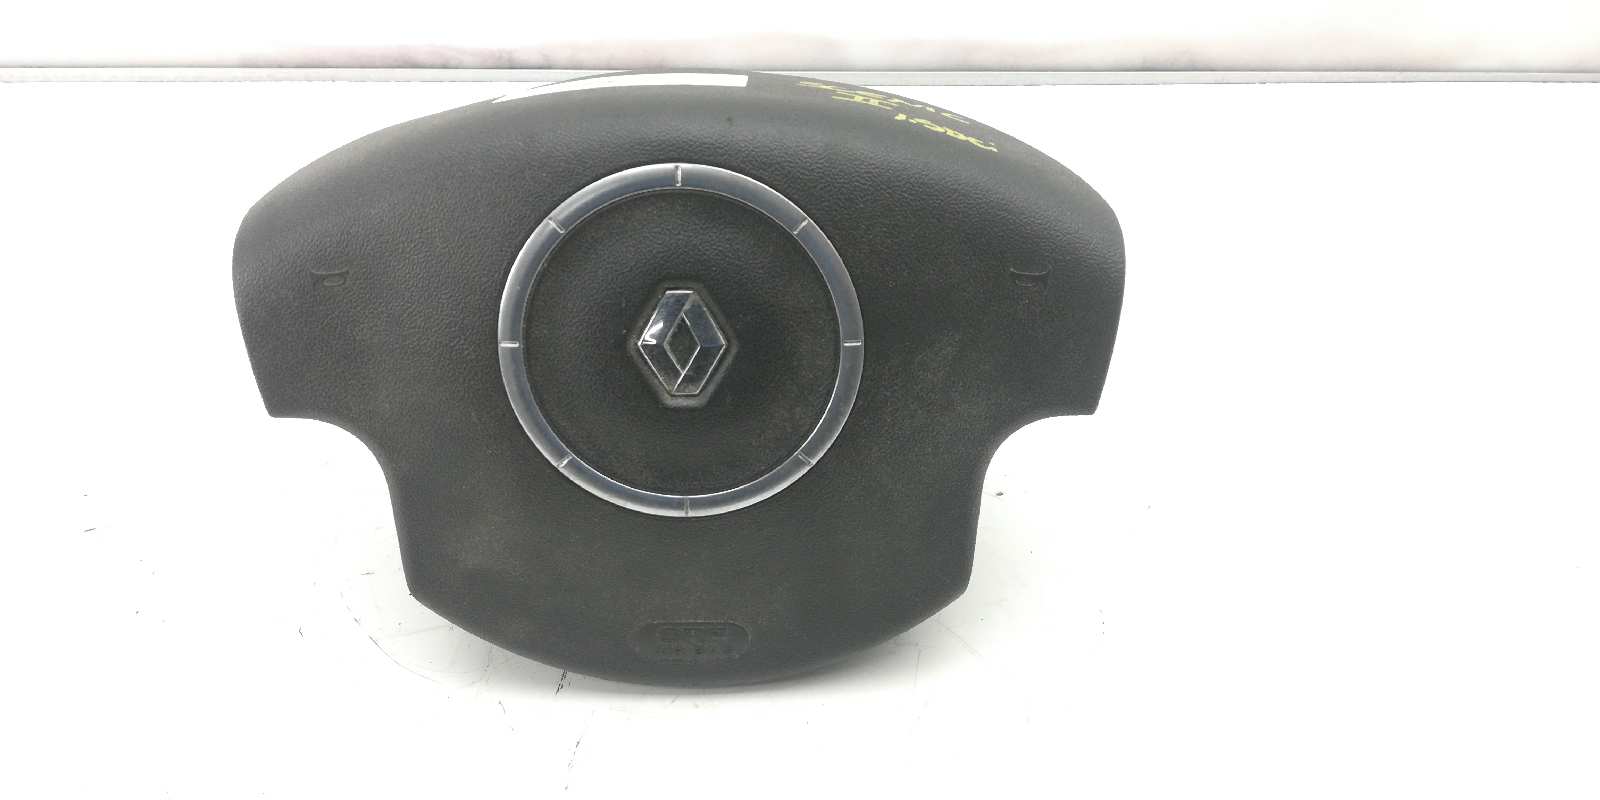 RENAULT Scenic 2 generation (2003-2010) Other Control Units 6056962, 6057303 18496917